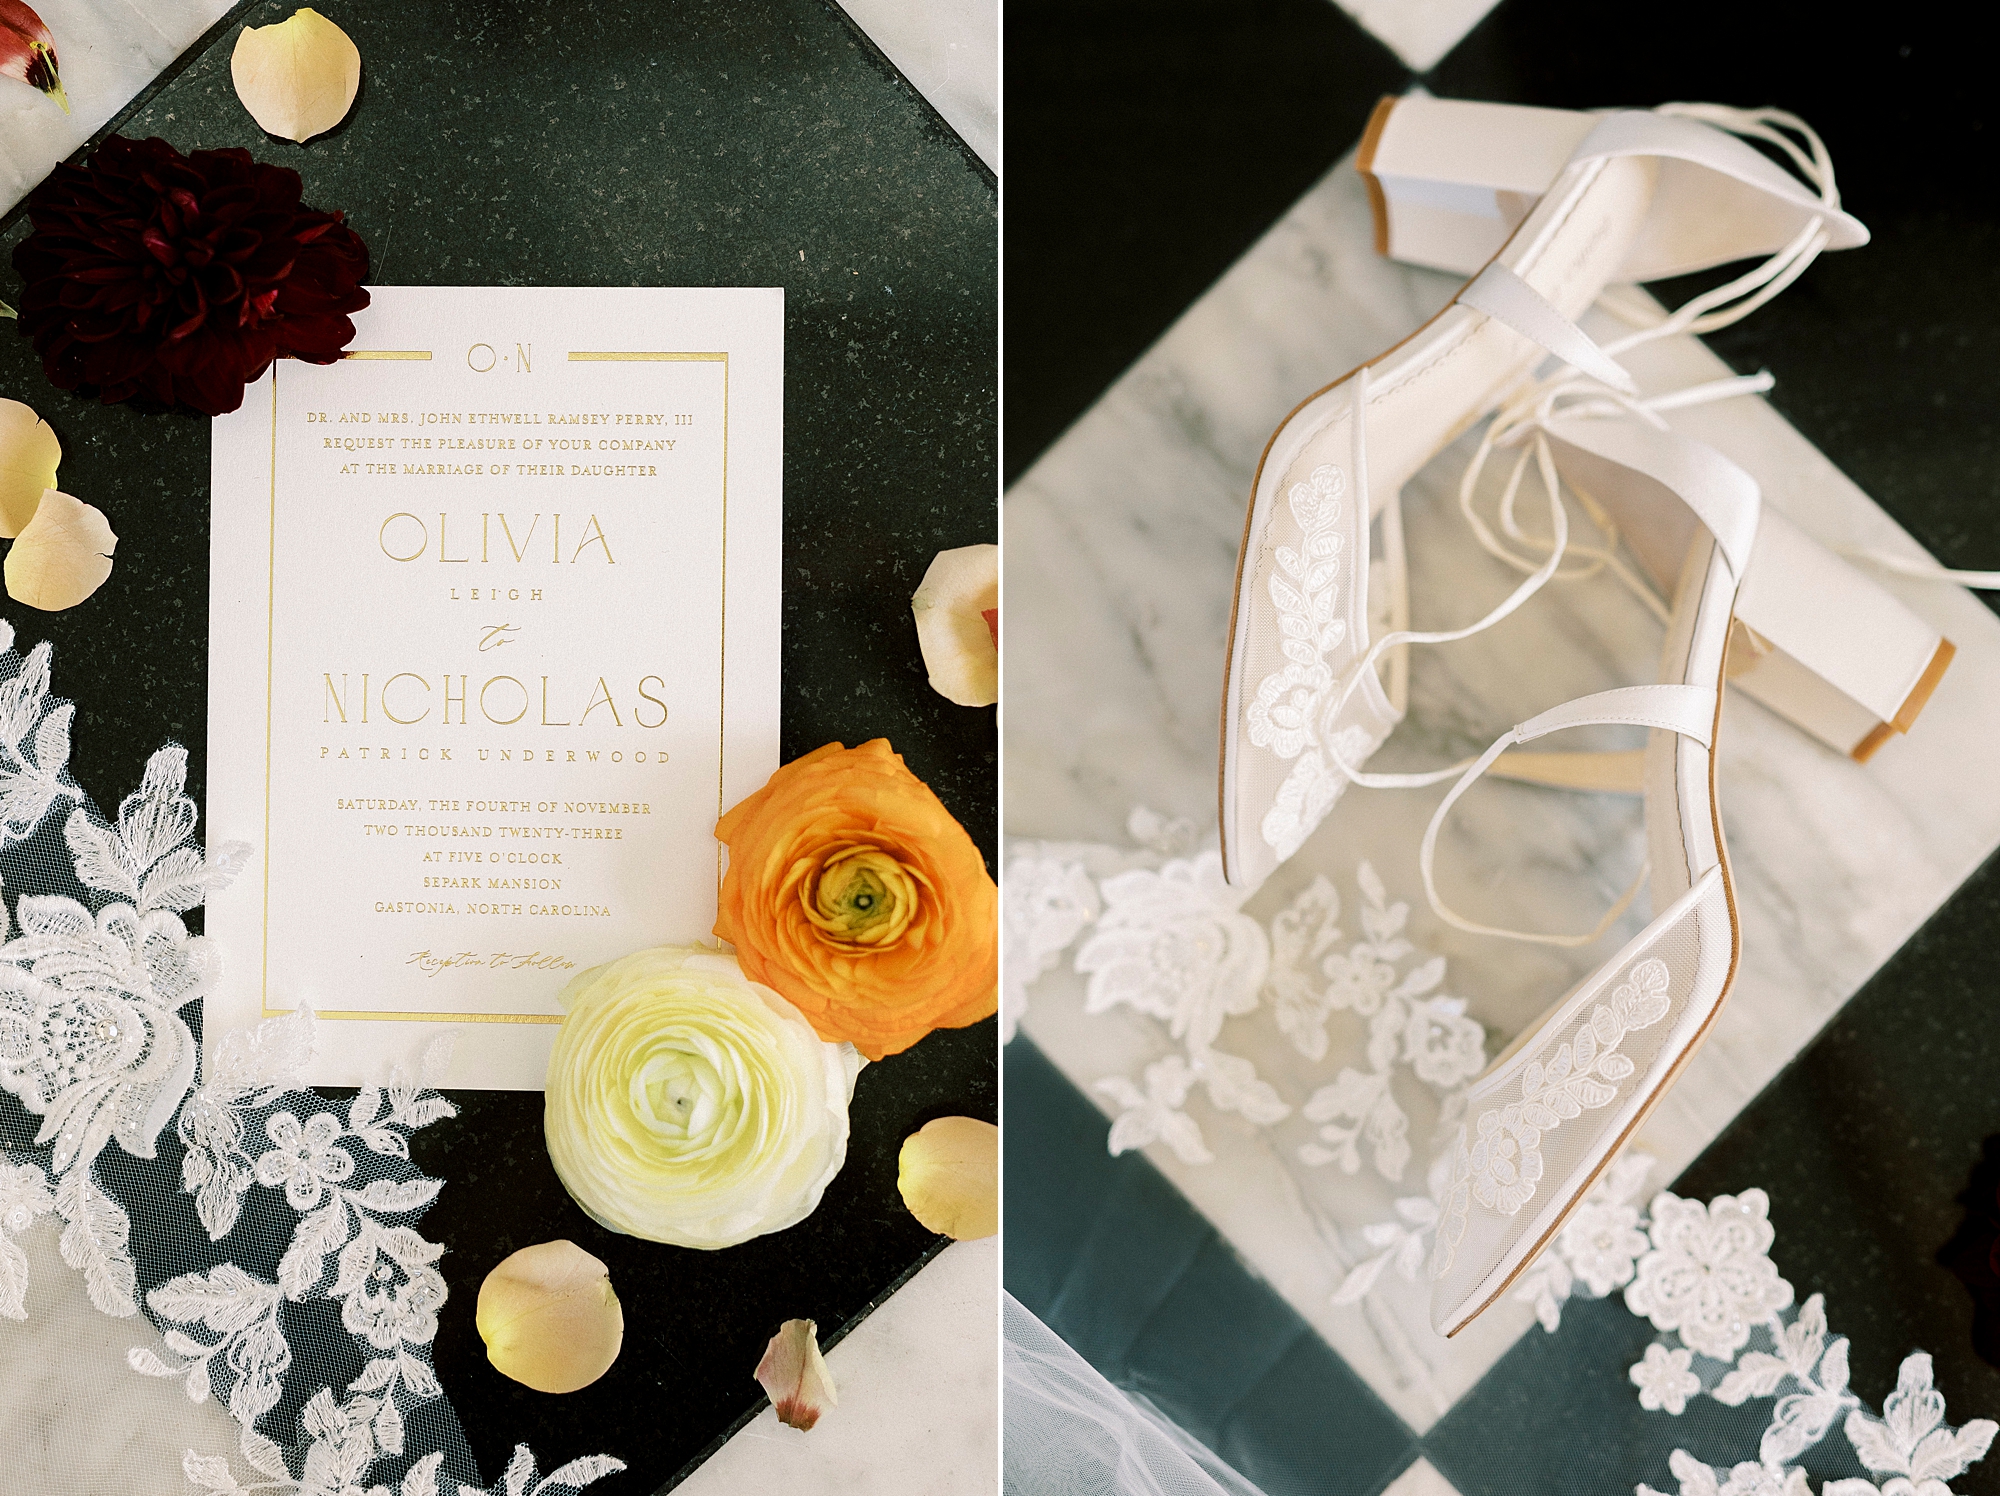 bride's shoes and invitation suite lay on black and white floor of Separk Mansion